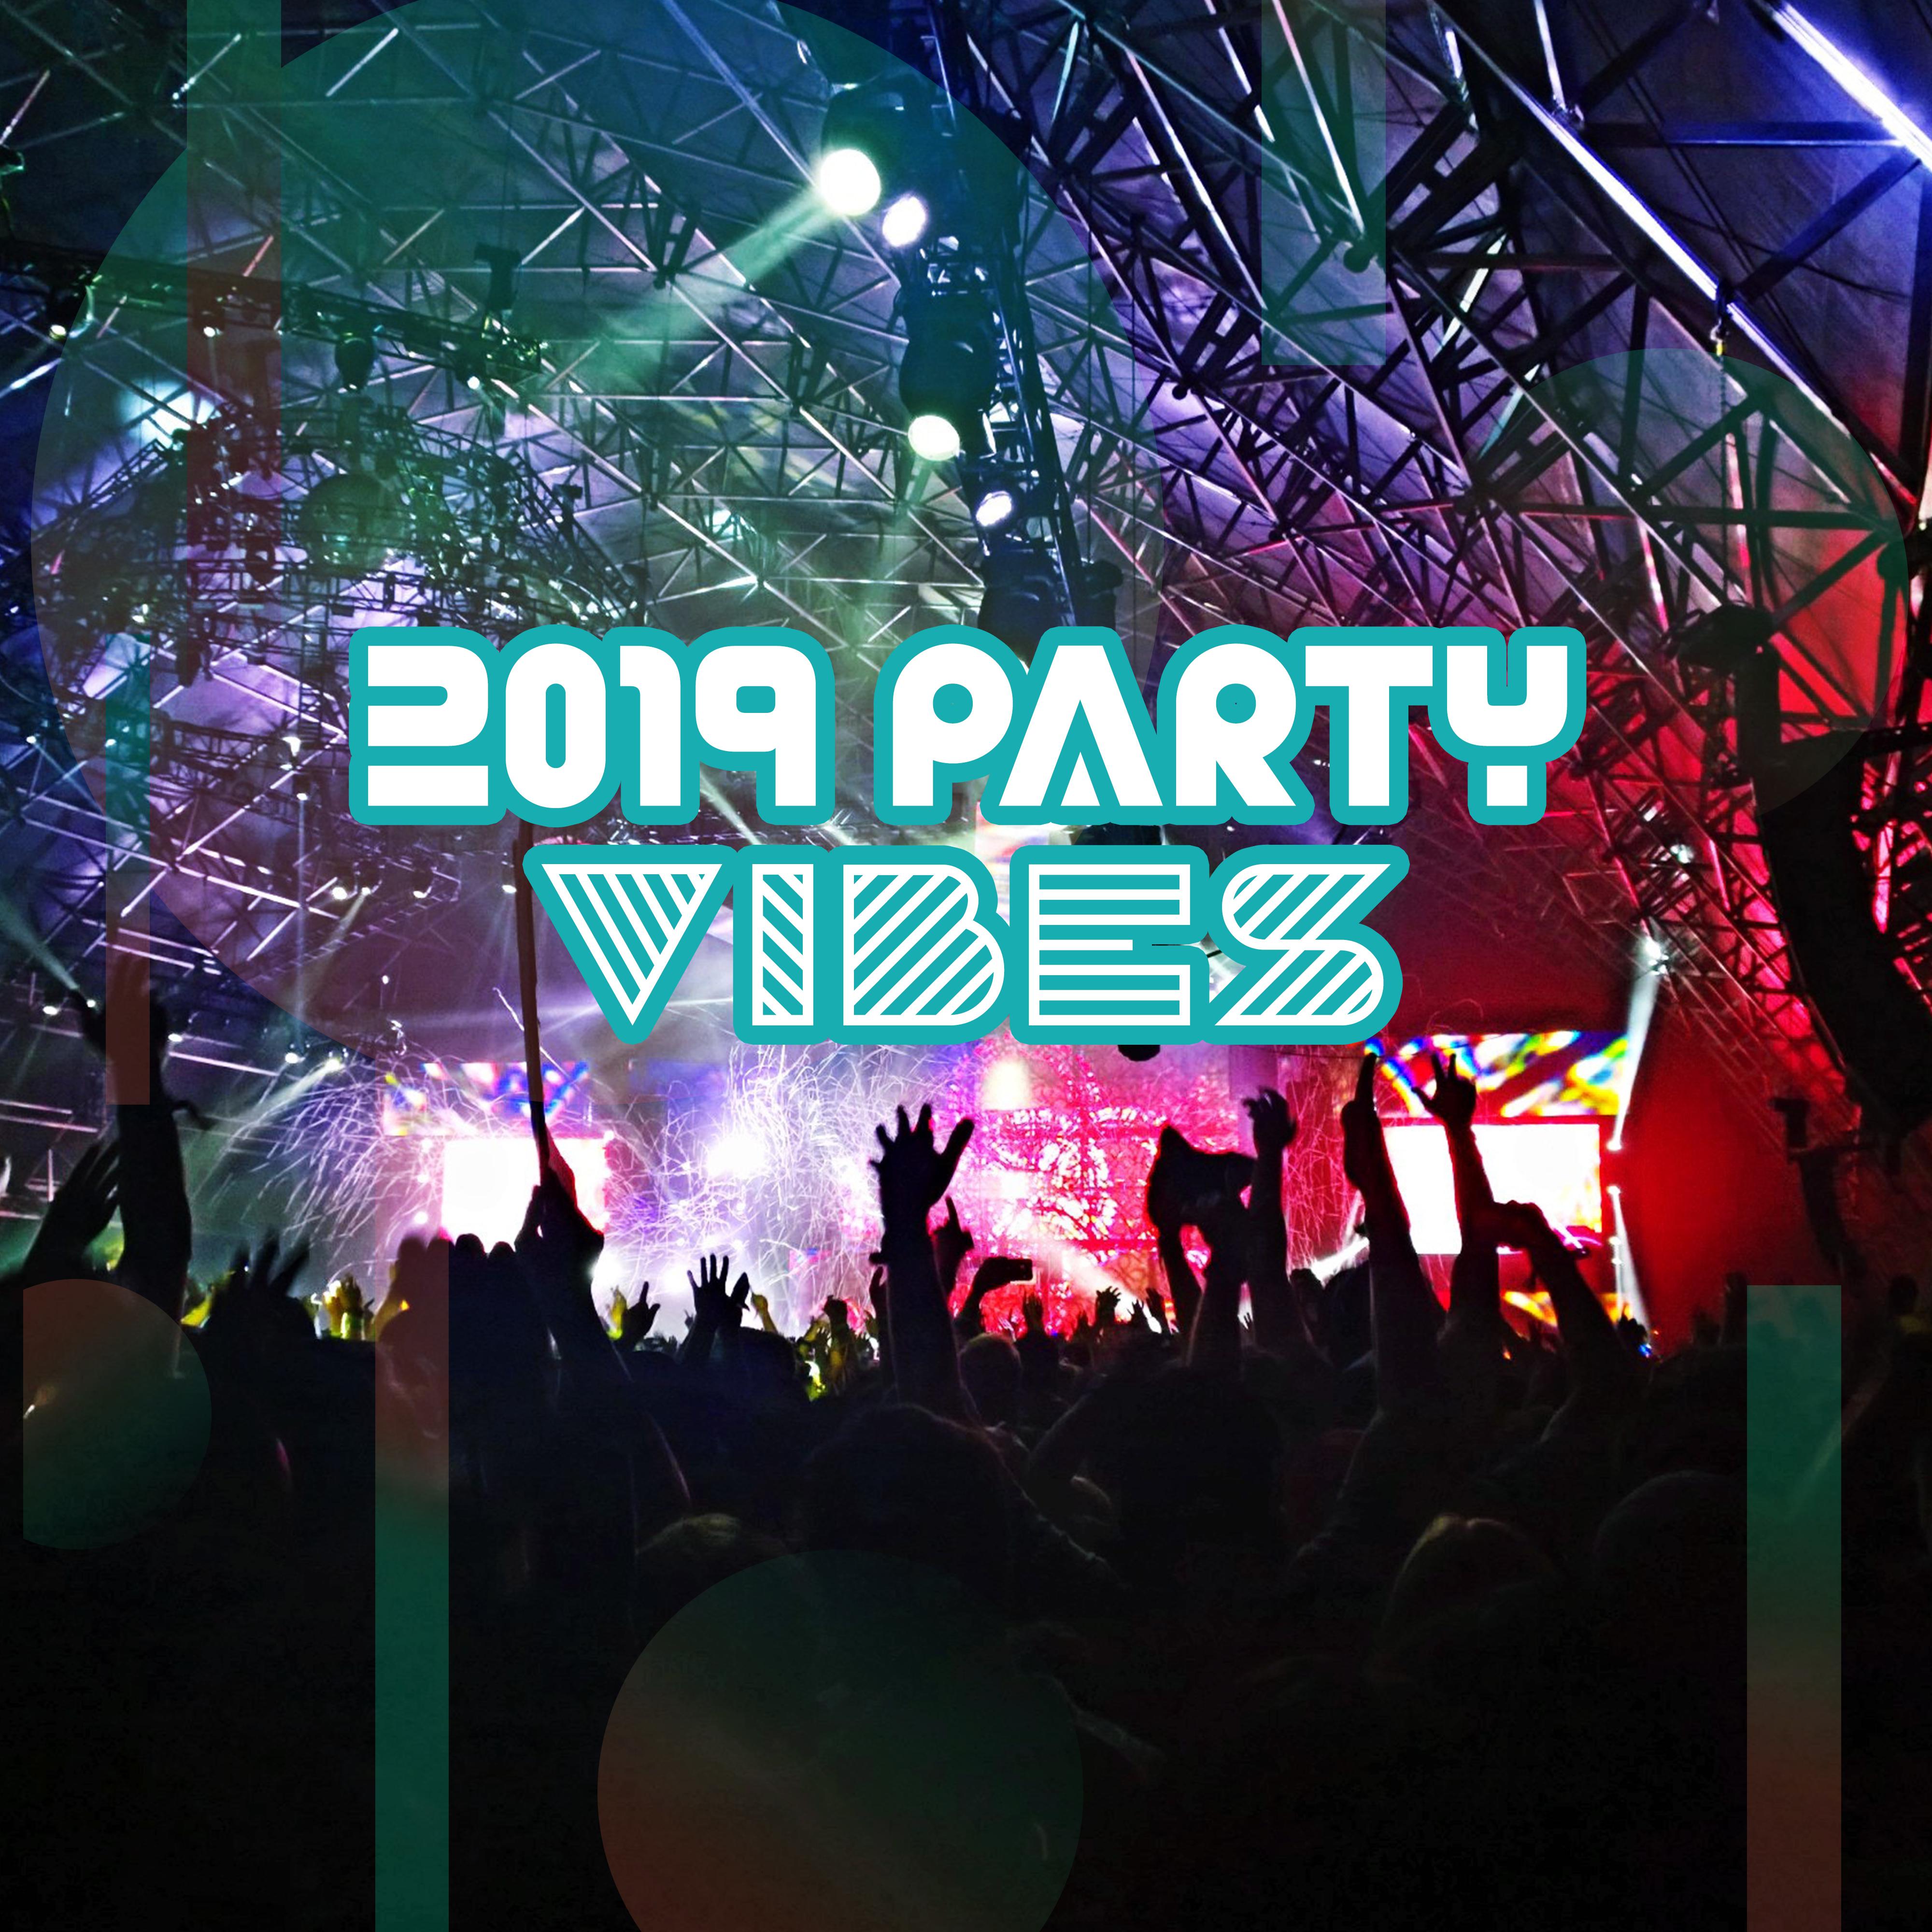 2019 Party Vibes – Dance Music, Chillout 2019, Ibiza Dance Party, **** Melodies, Ibiza Drink Bar, Lounge Music